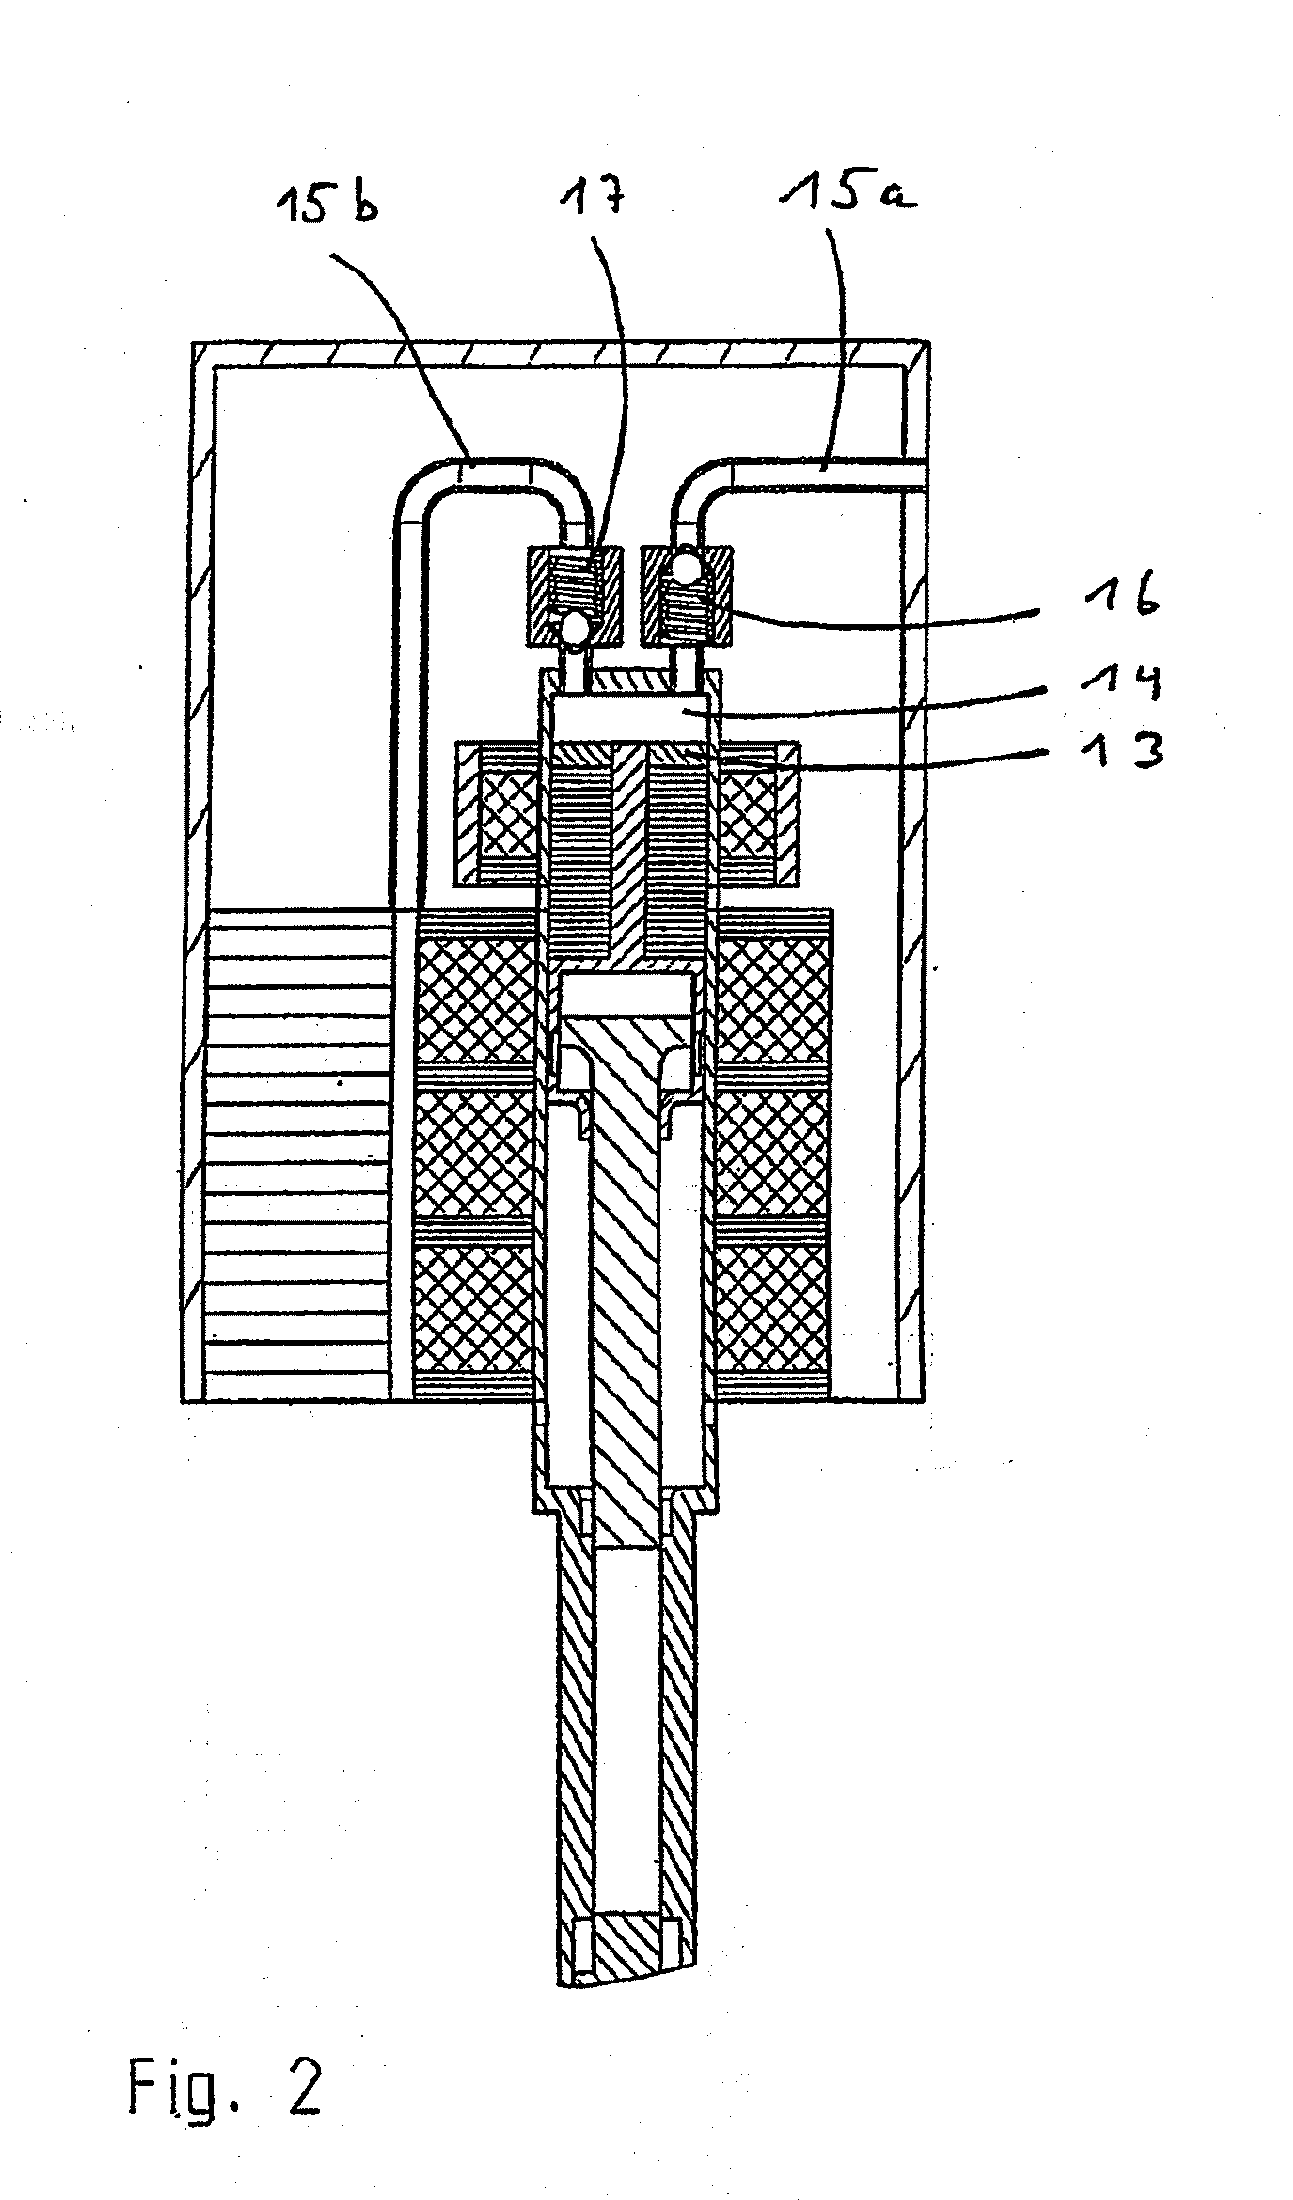 Linearly Driven and Air-Cooled Boring and/or Percussion Hammer